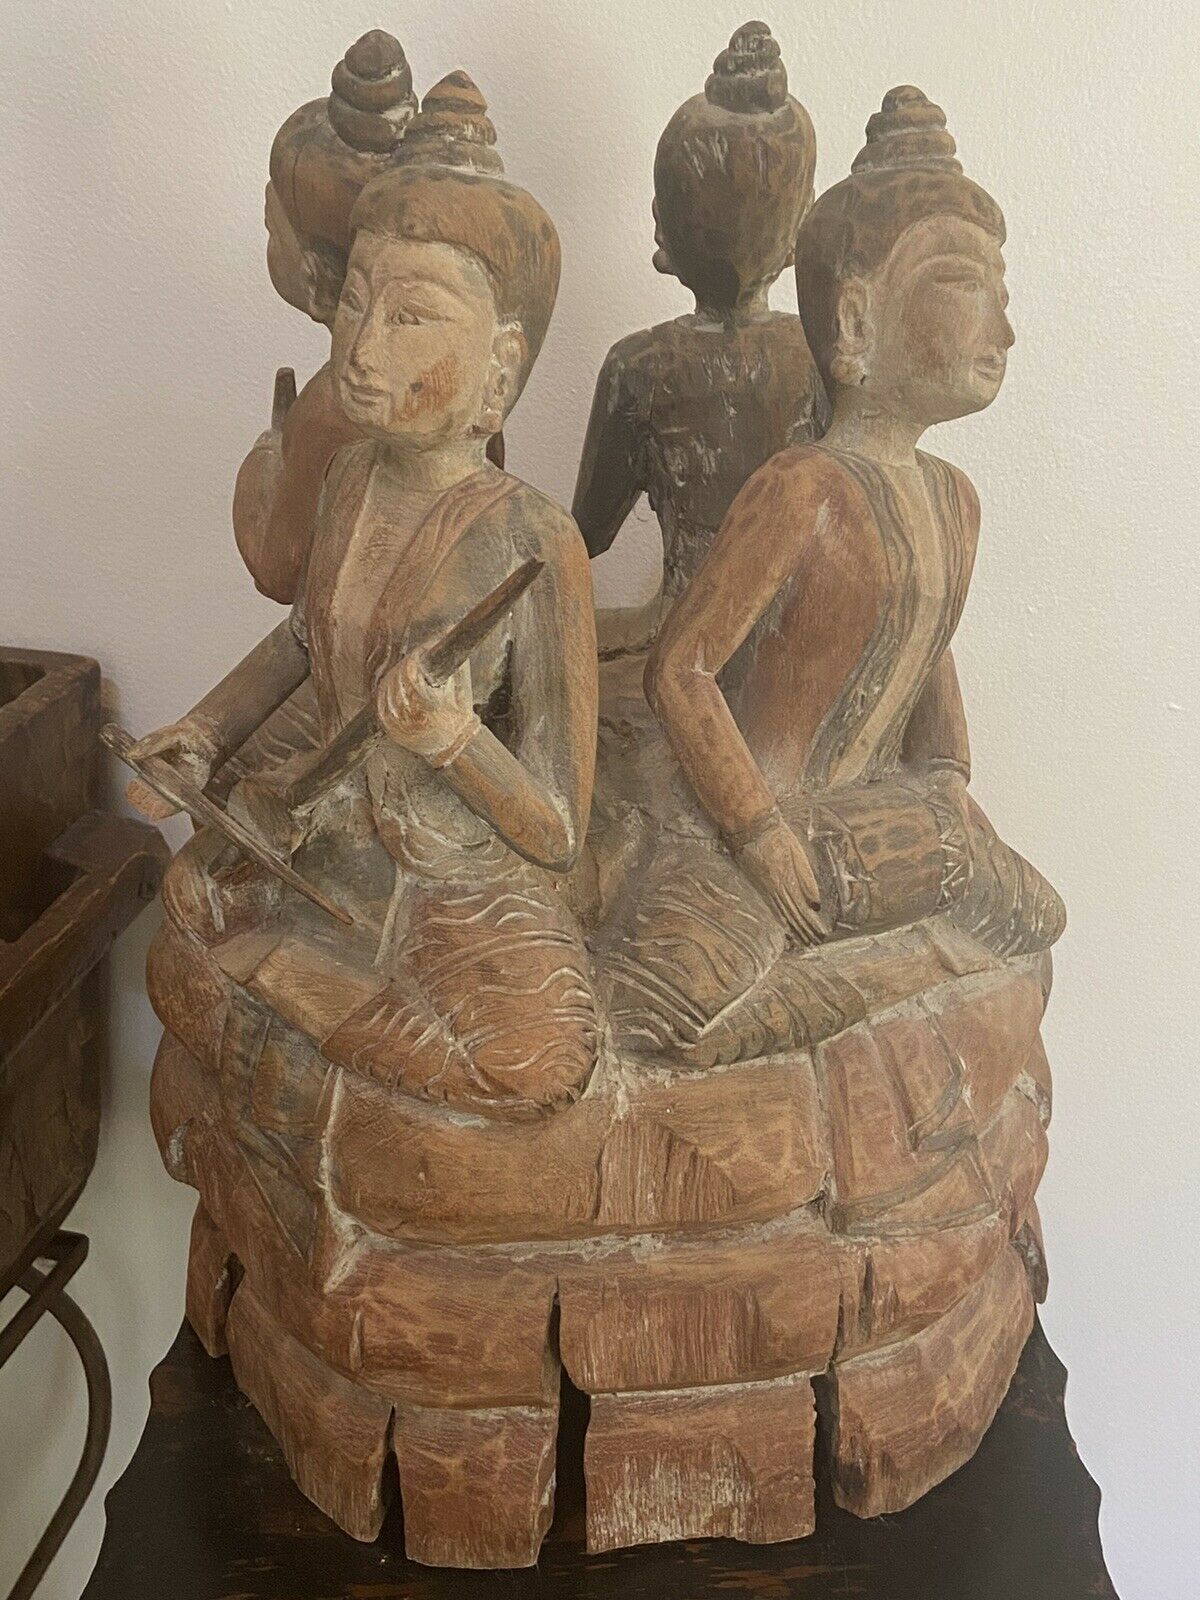 ANTIQUE THAI BUDDHAS PLAYING INSTRUMENTS LARGE WOOD LOG CARVING RARE